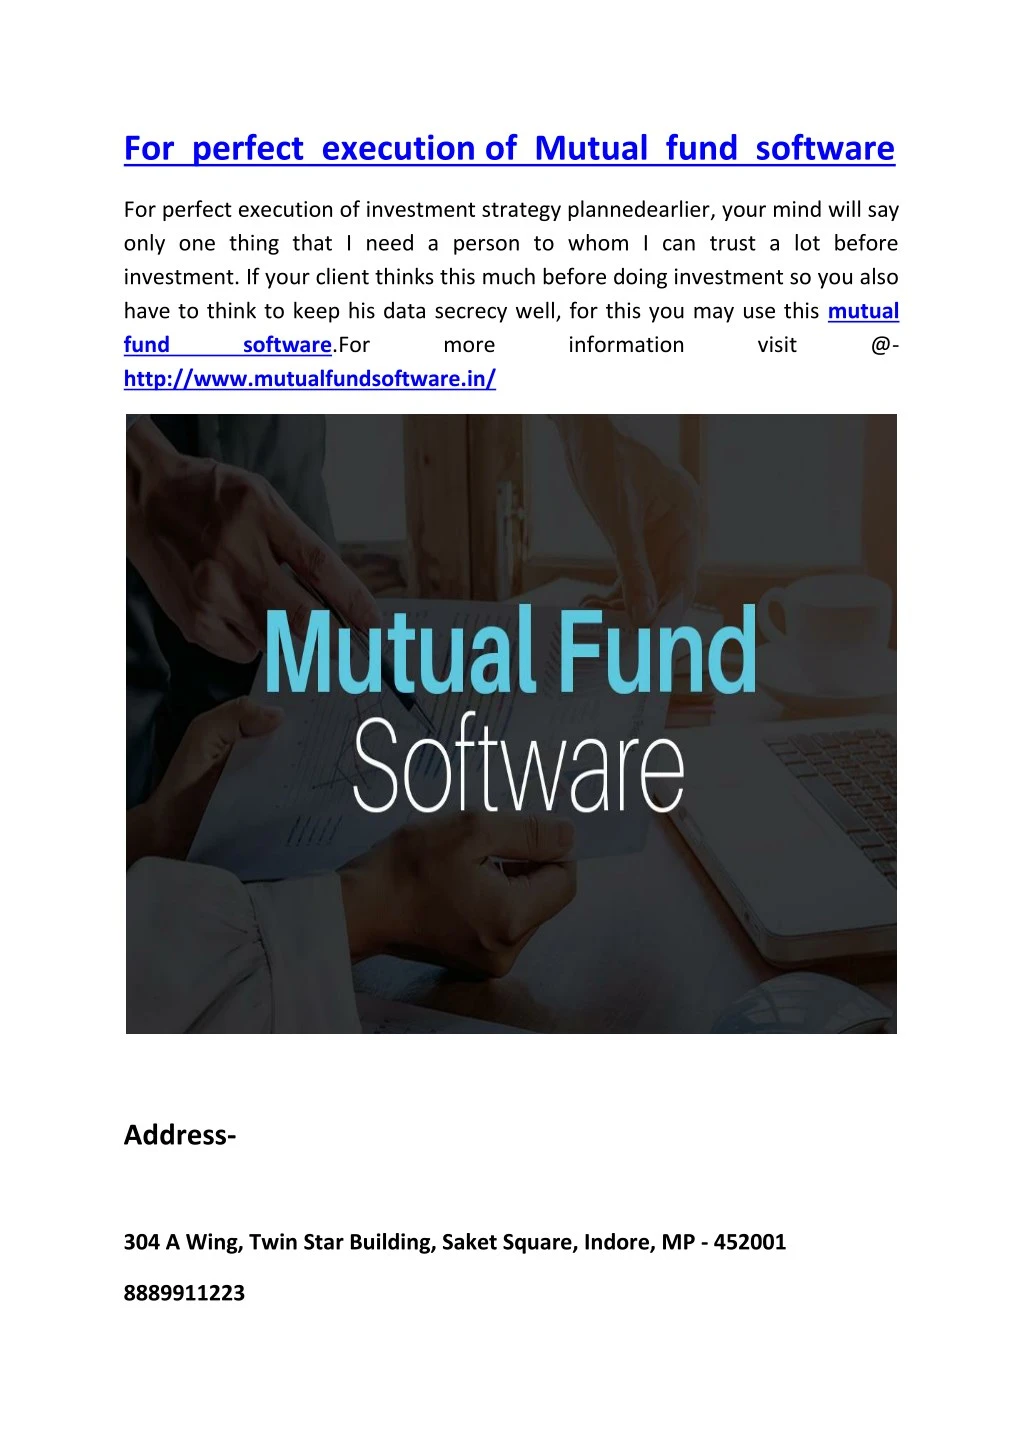 for perfect execution of mutual fund software